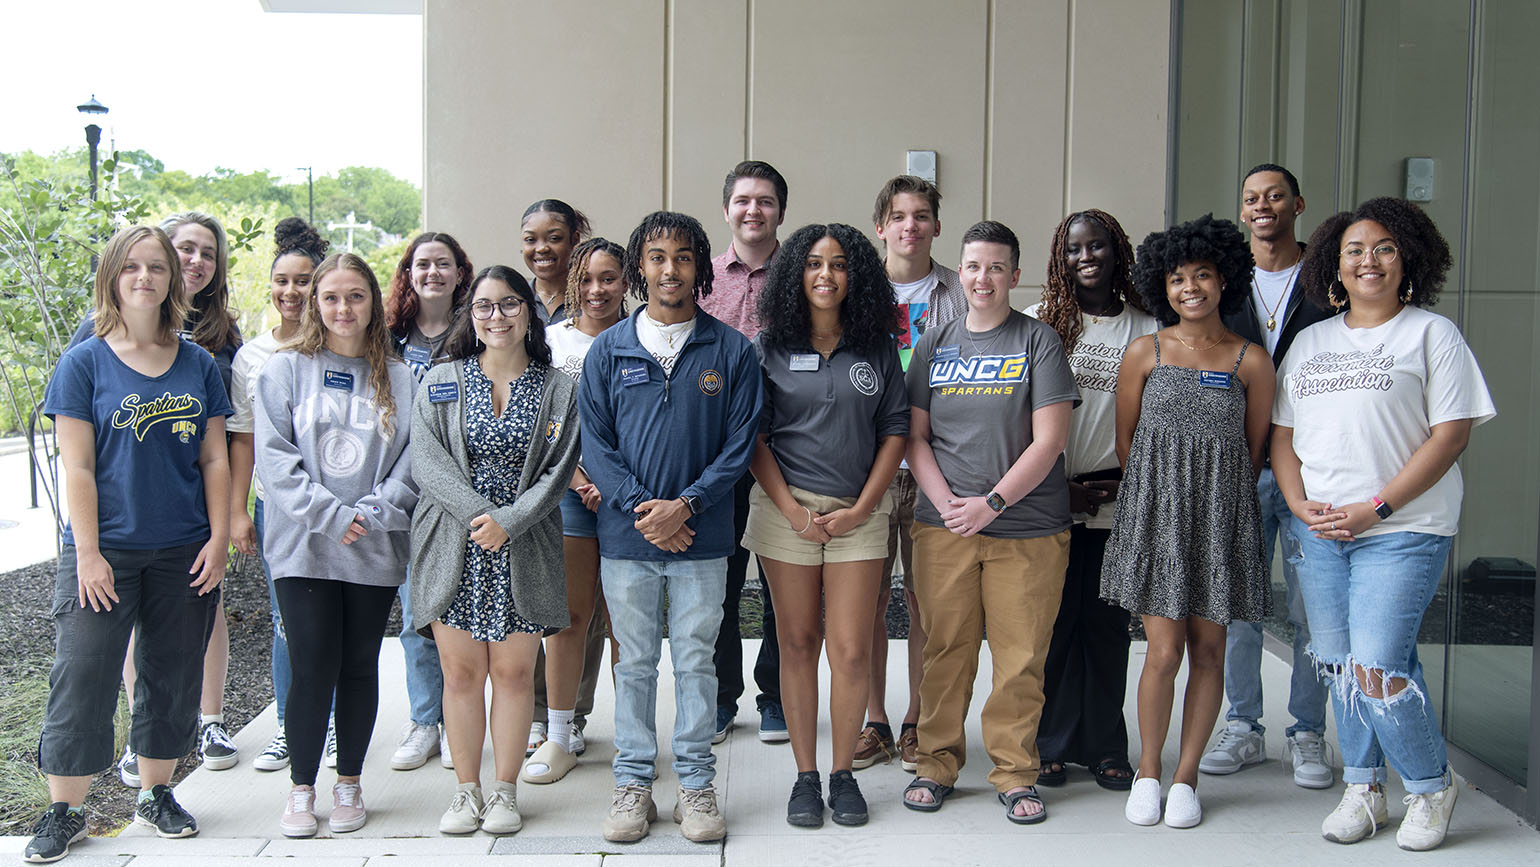 UNCG SGA student members in a group